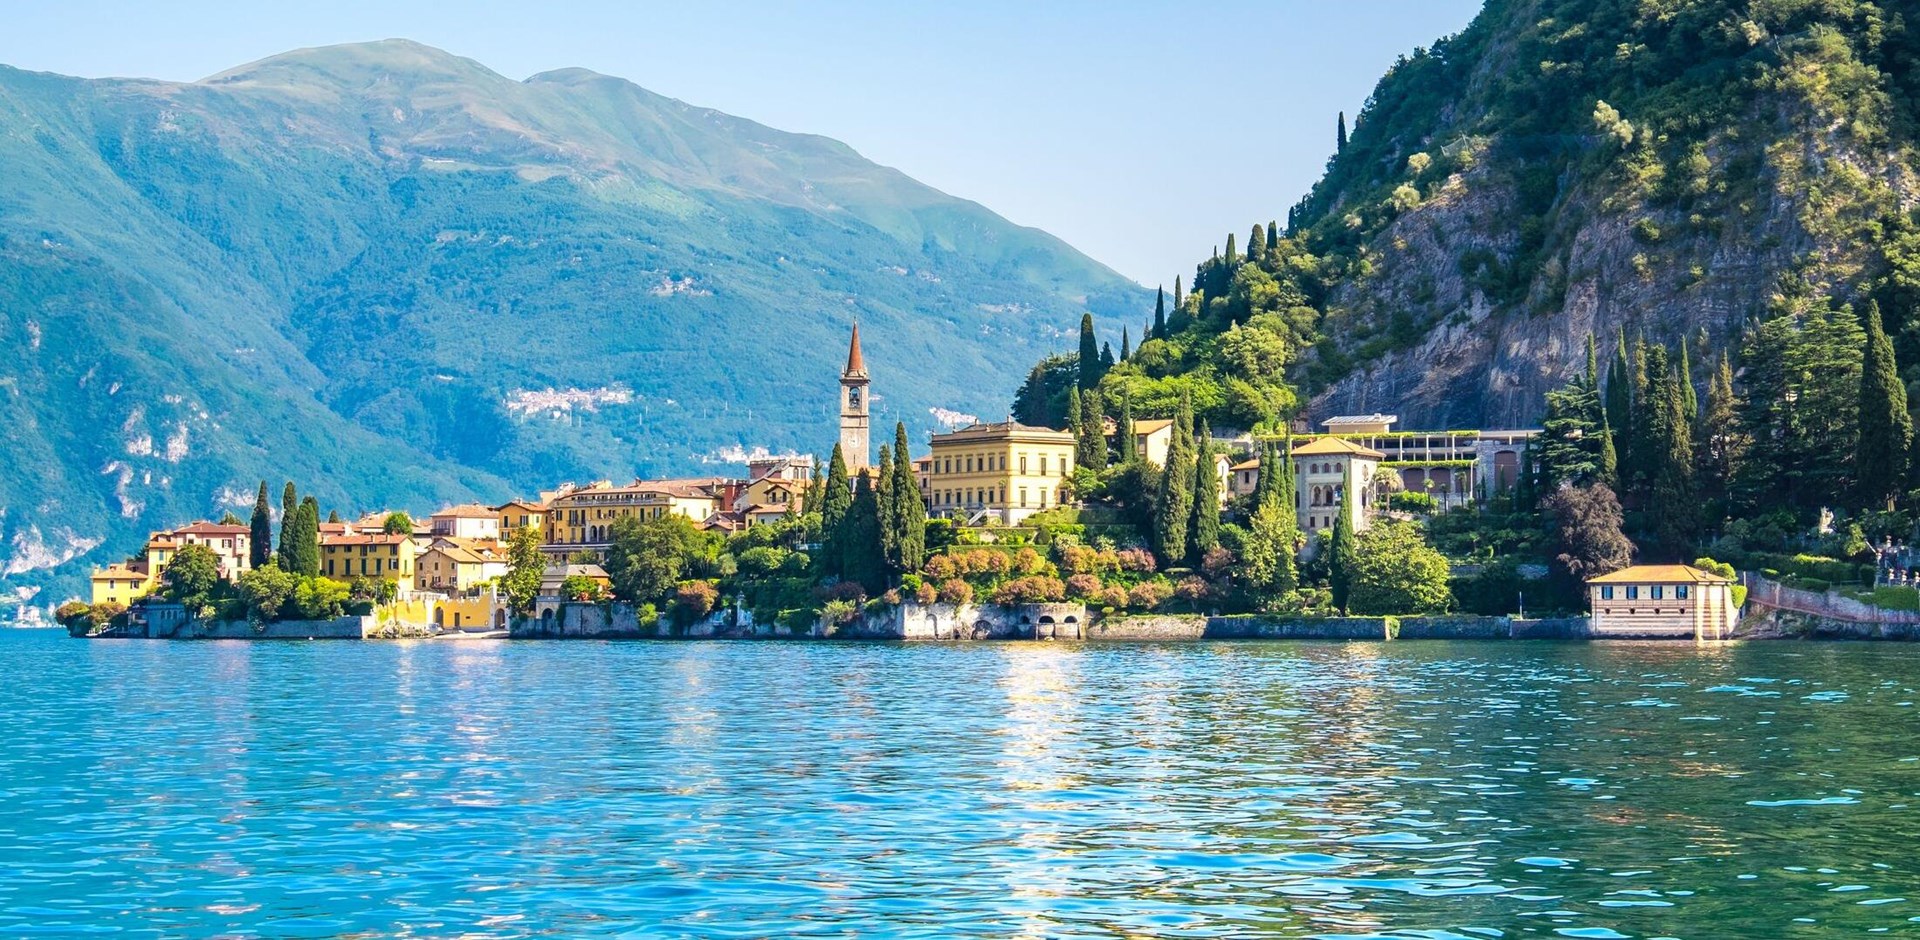 Varenna the one of town in lake como, Italy